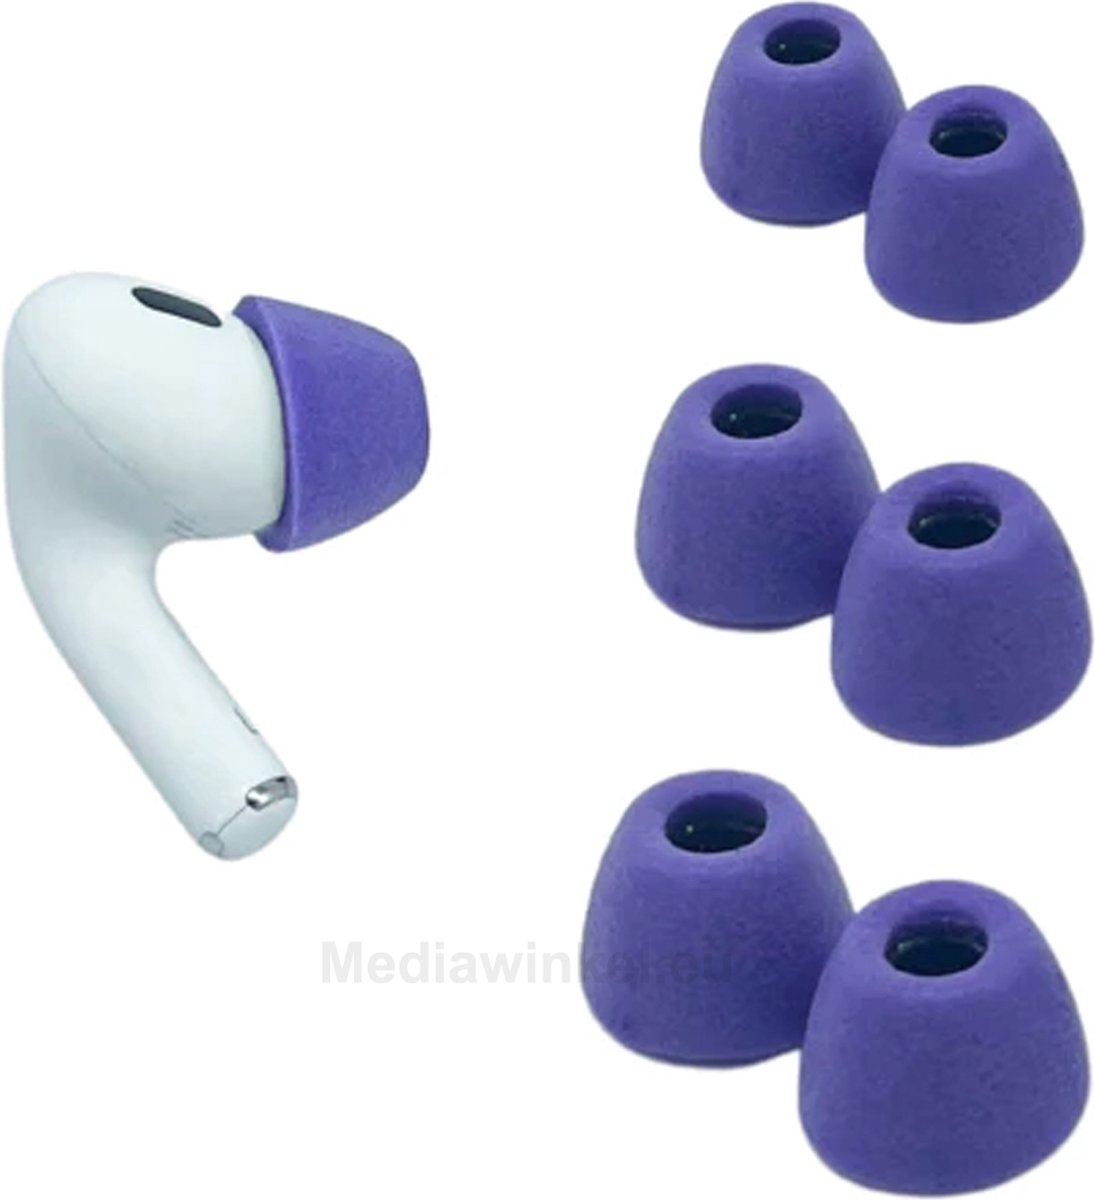 Comply Foam Tips 2.0 voor AirPods Pro, size: small, Lilac